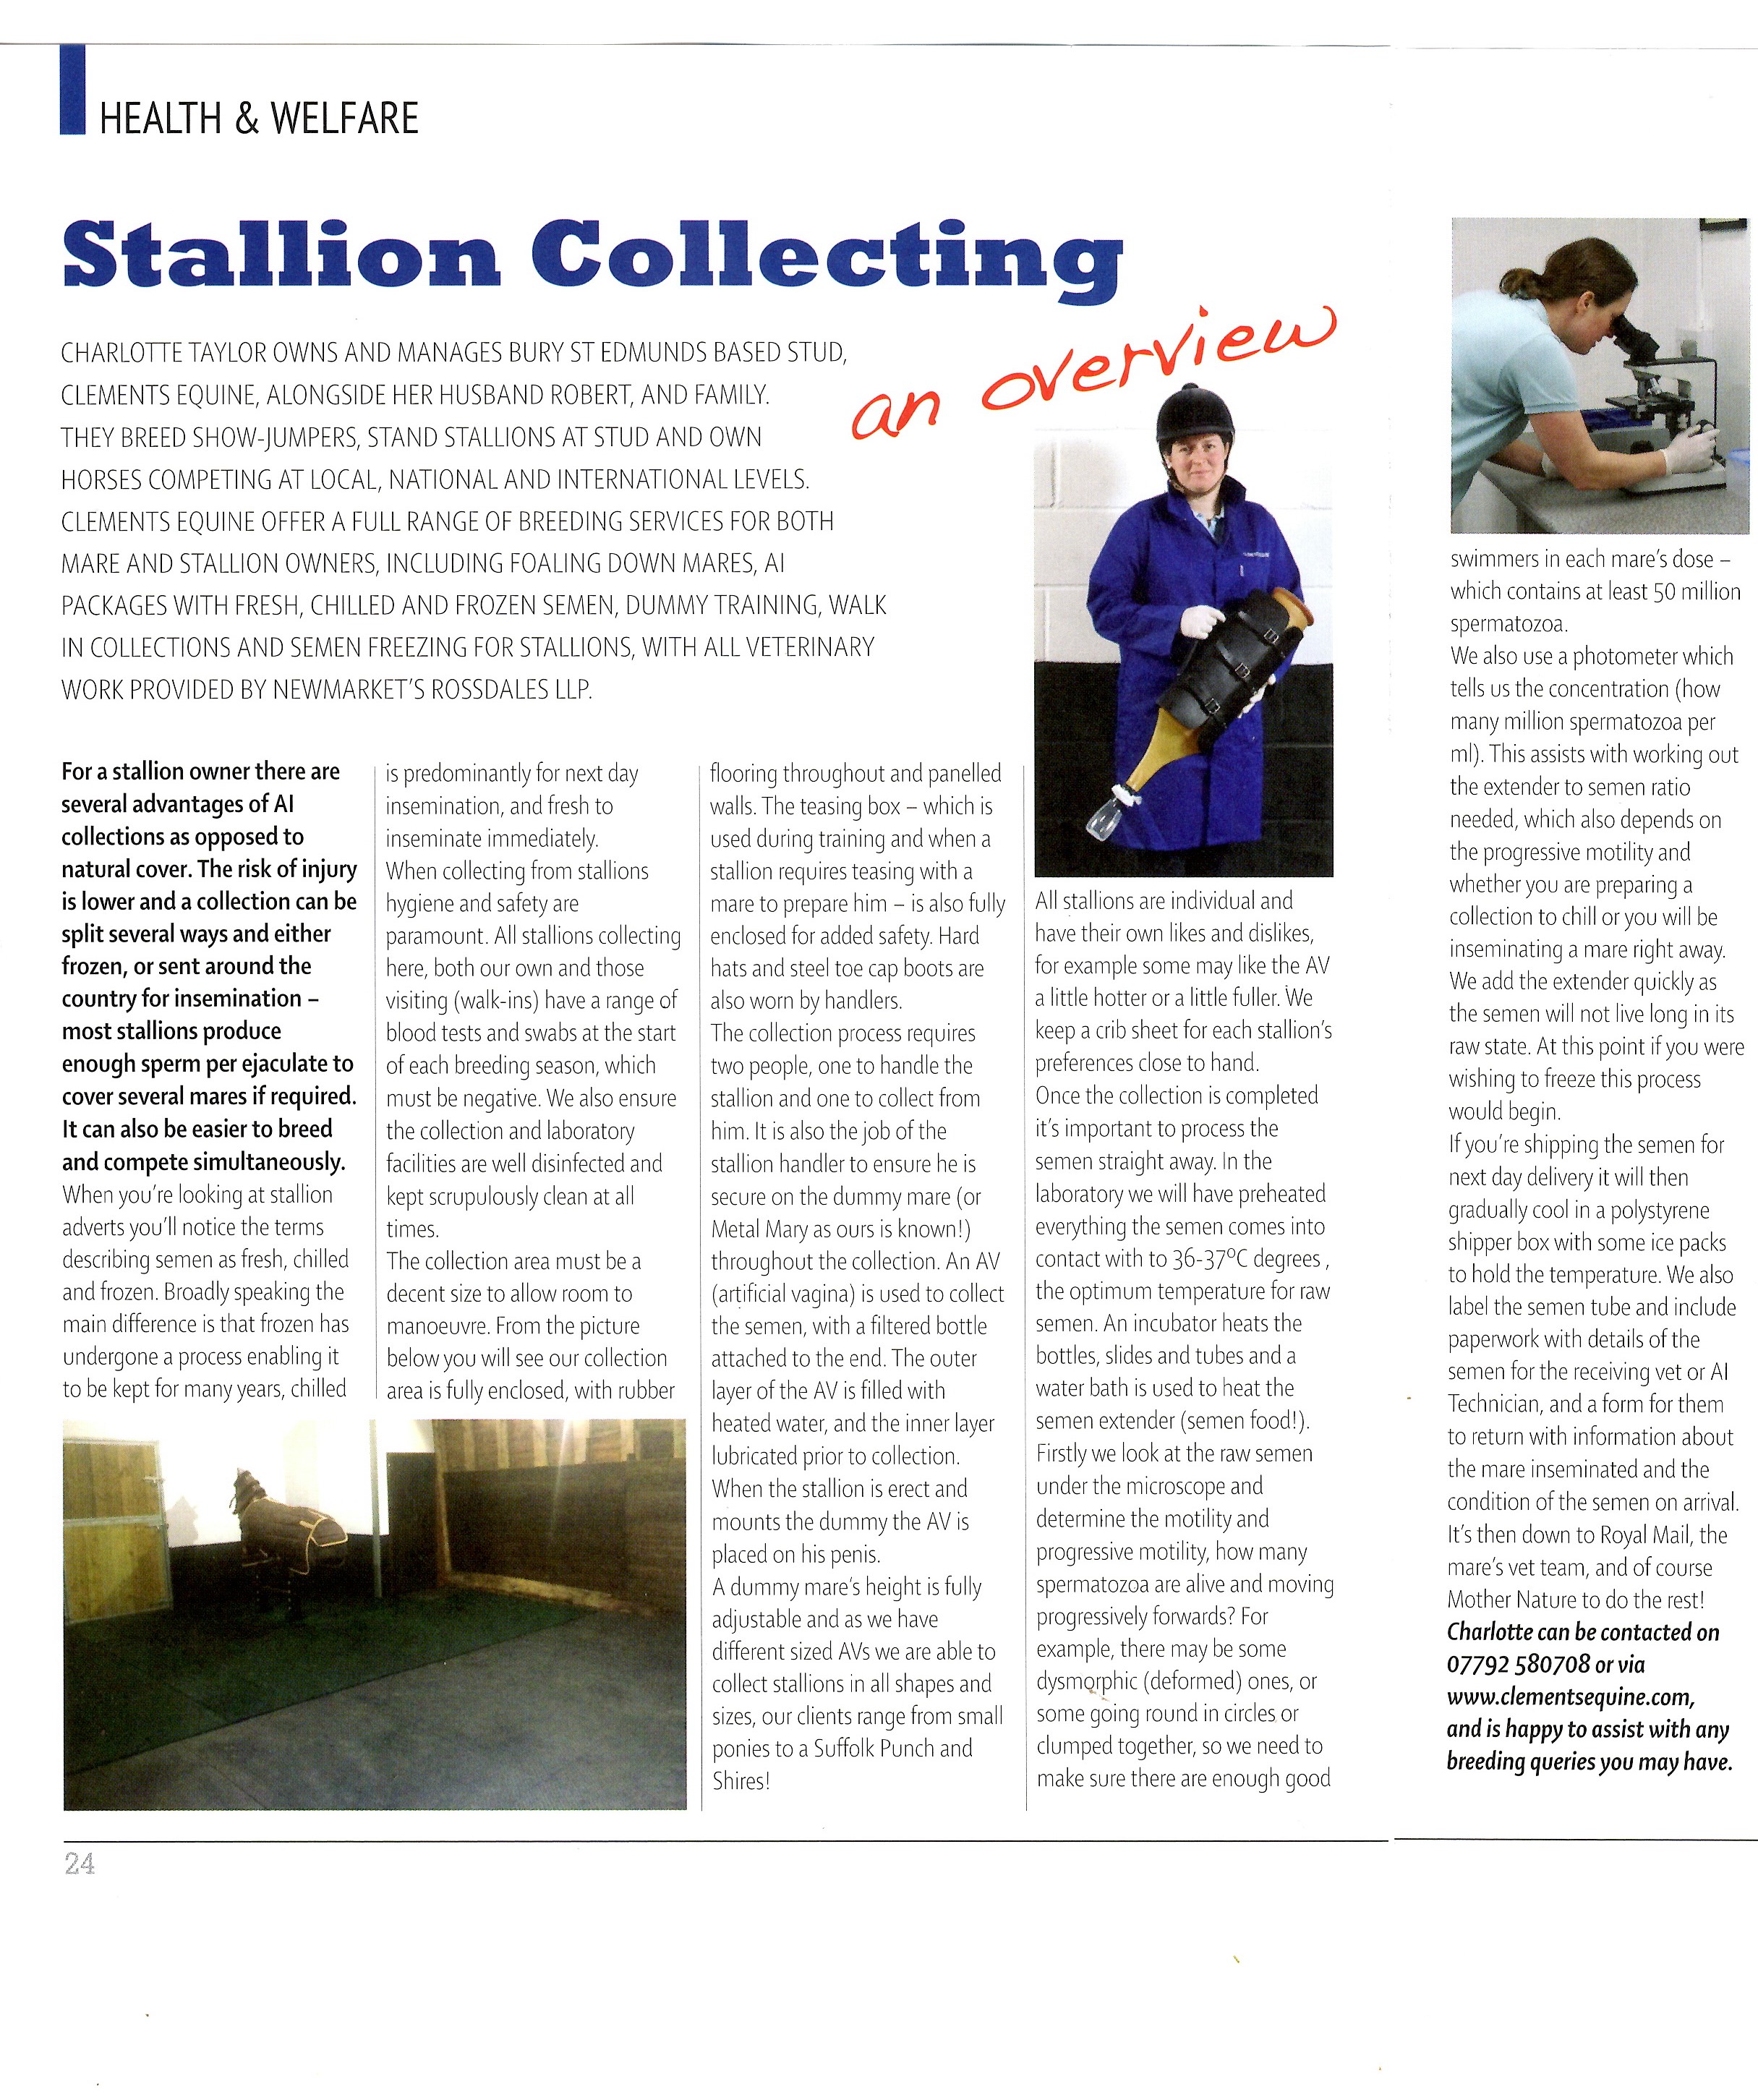 Article on collecting stallions for AI written for Absolute Horse magazine